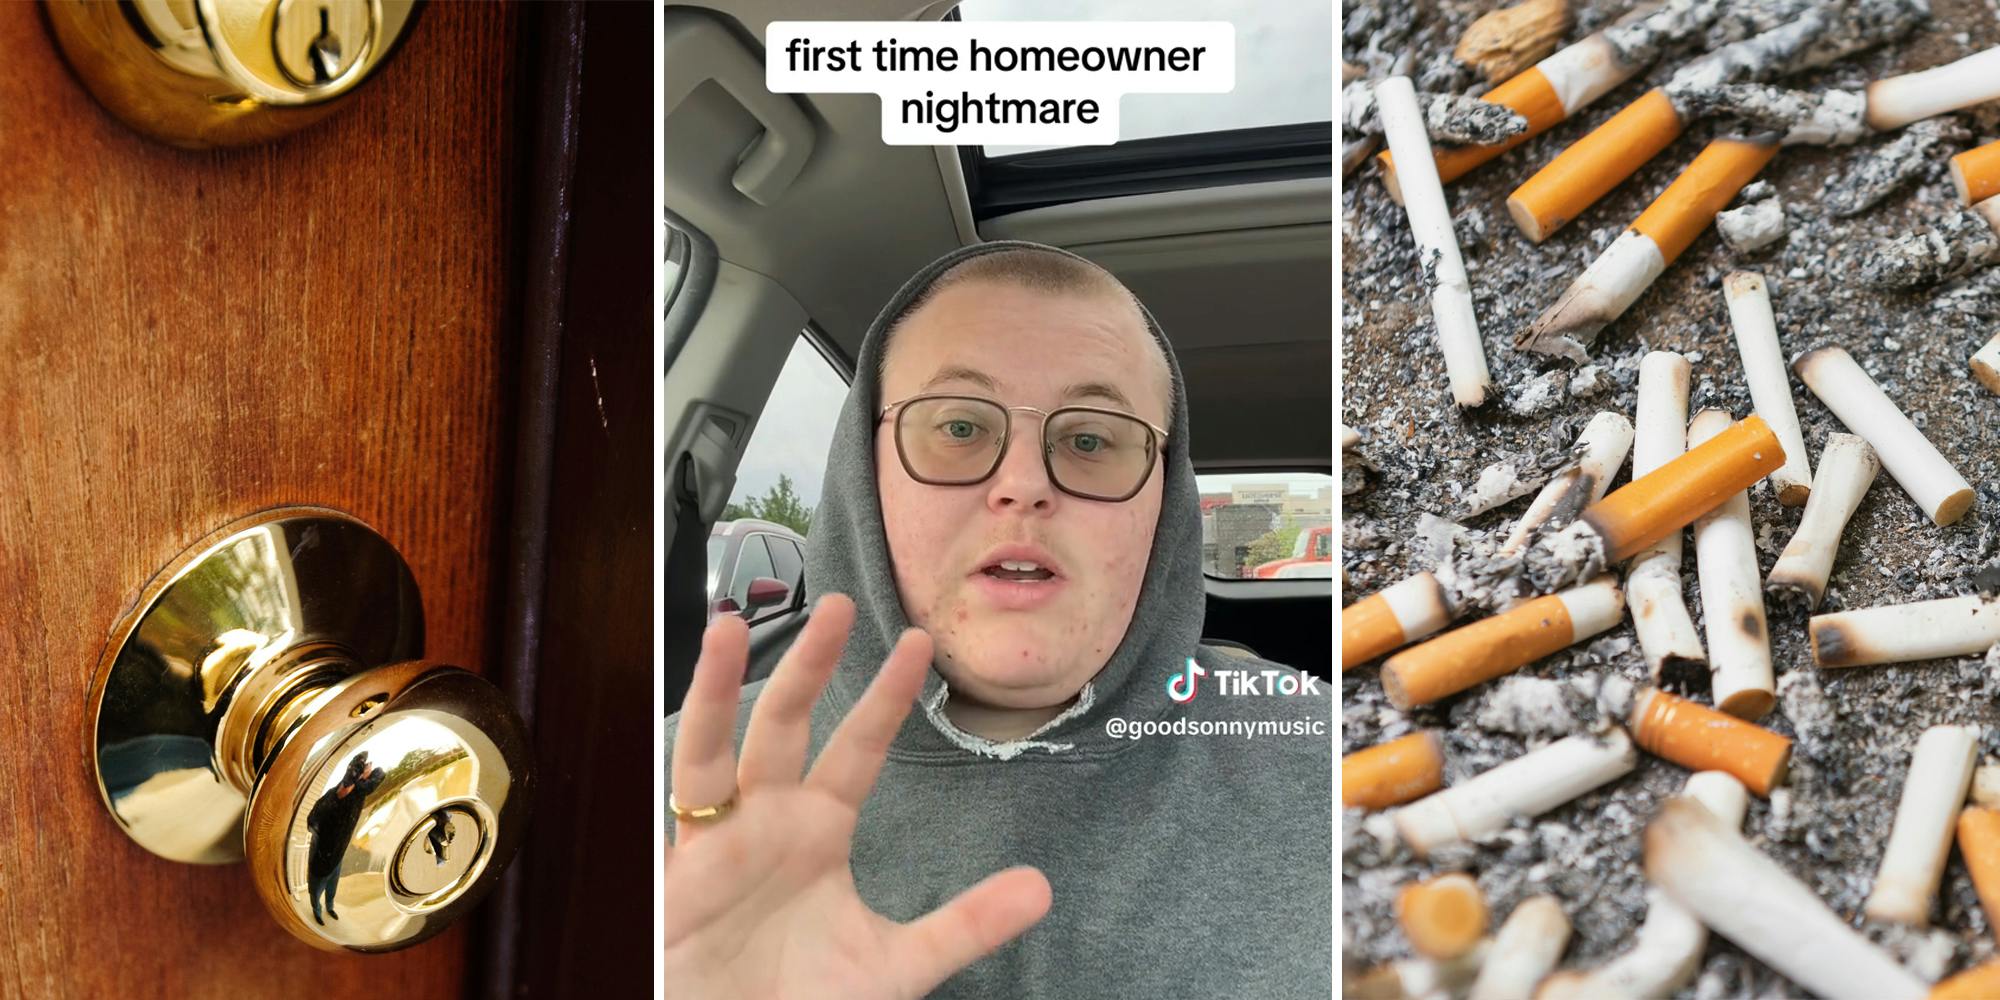 door knob (l) person in car with caption "first time homeowner nightmare" (c) cigarette butts (r)